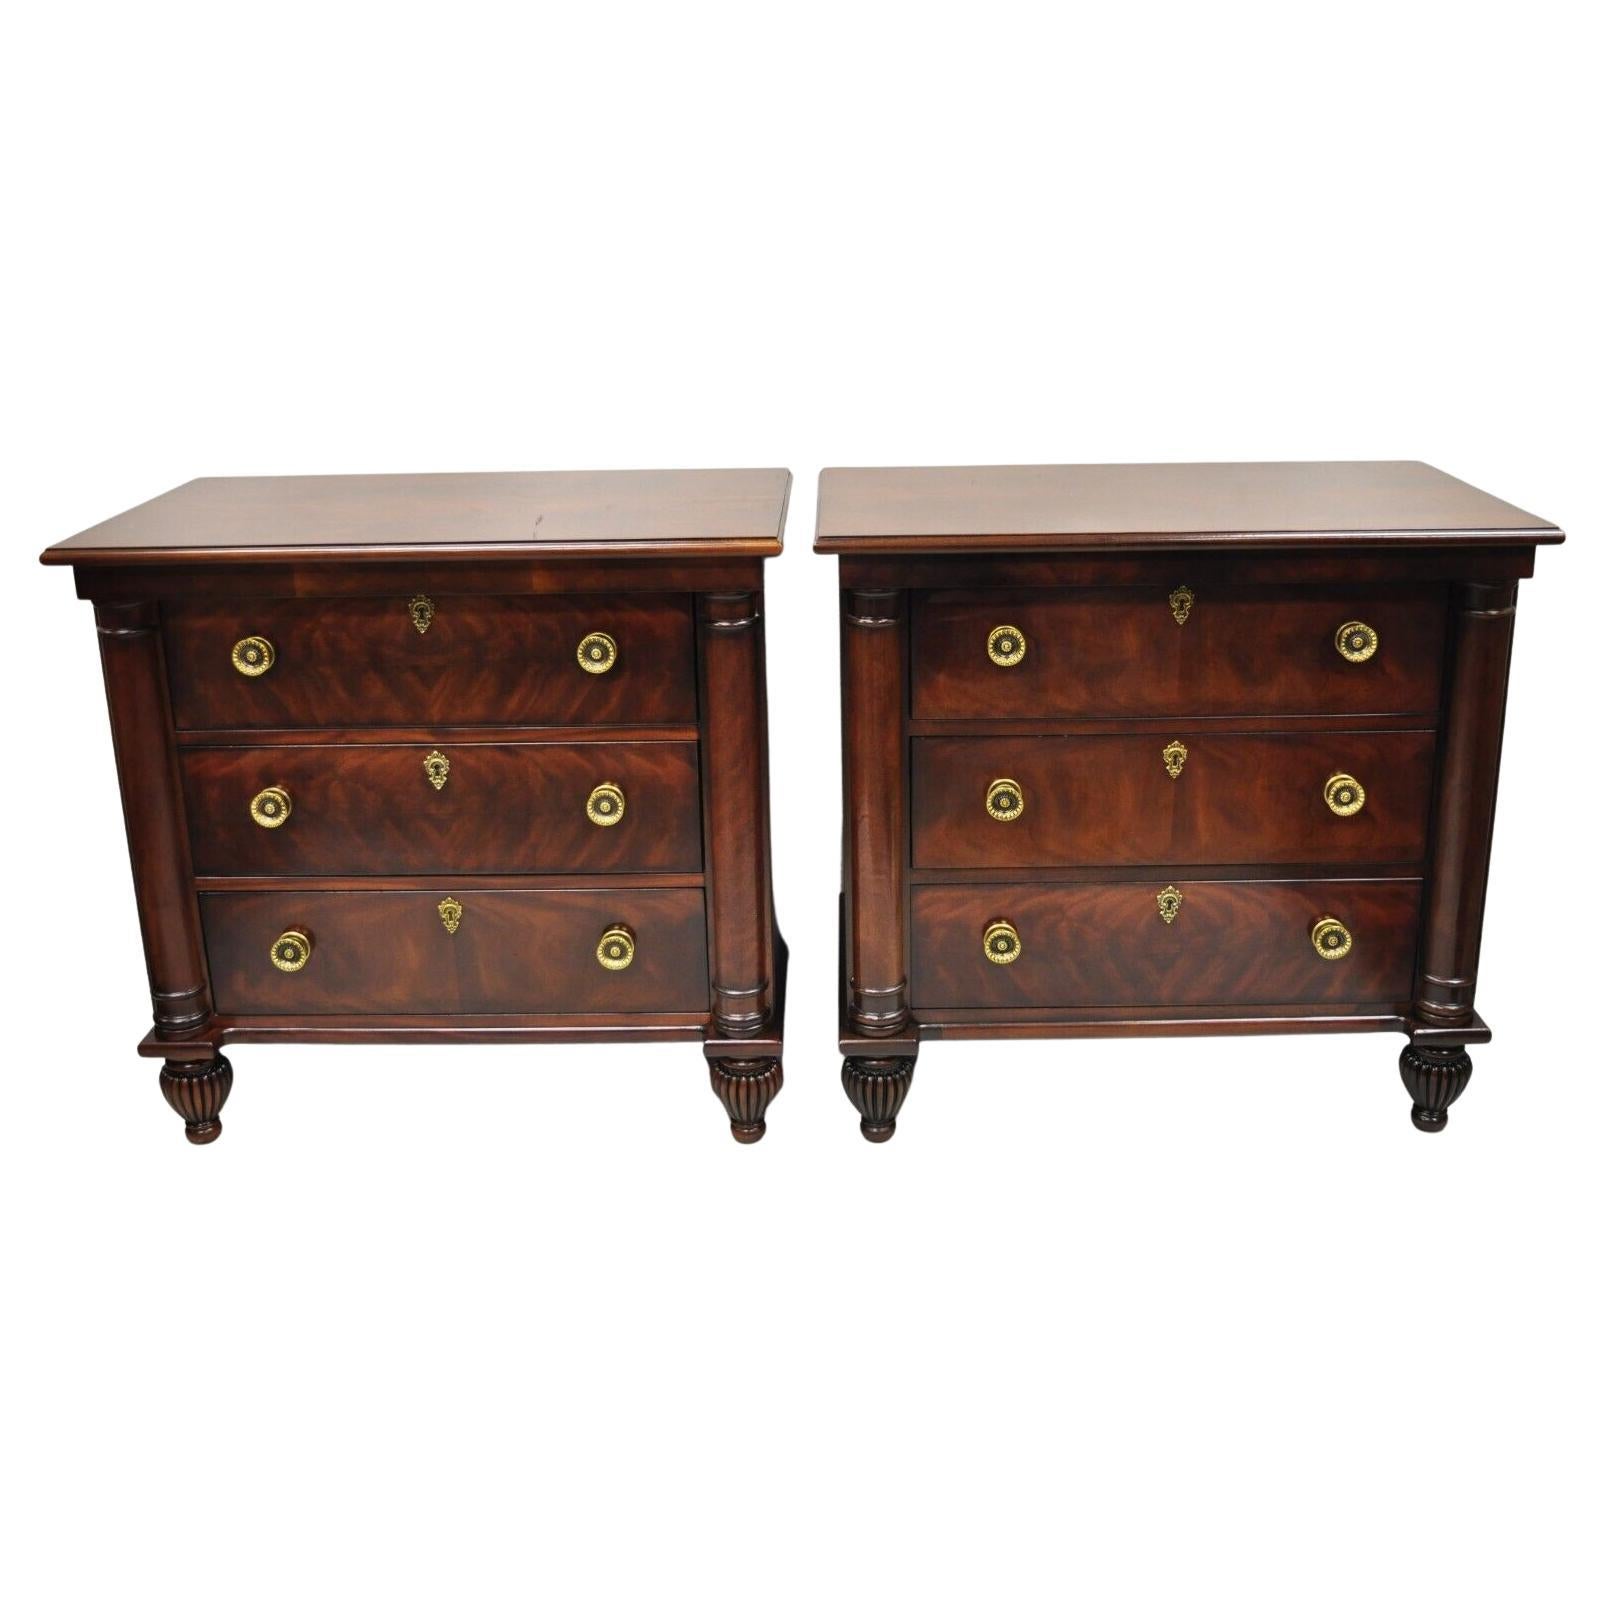 Henredon French Empire Neoclassical Style Mahogany 3 Drawer Nightstands, a Pair